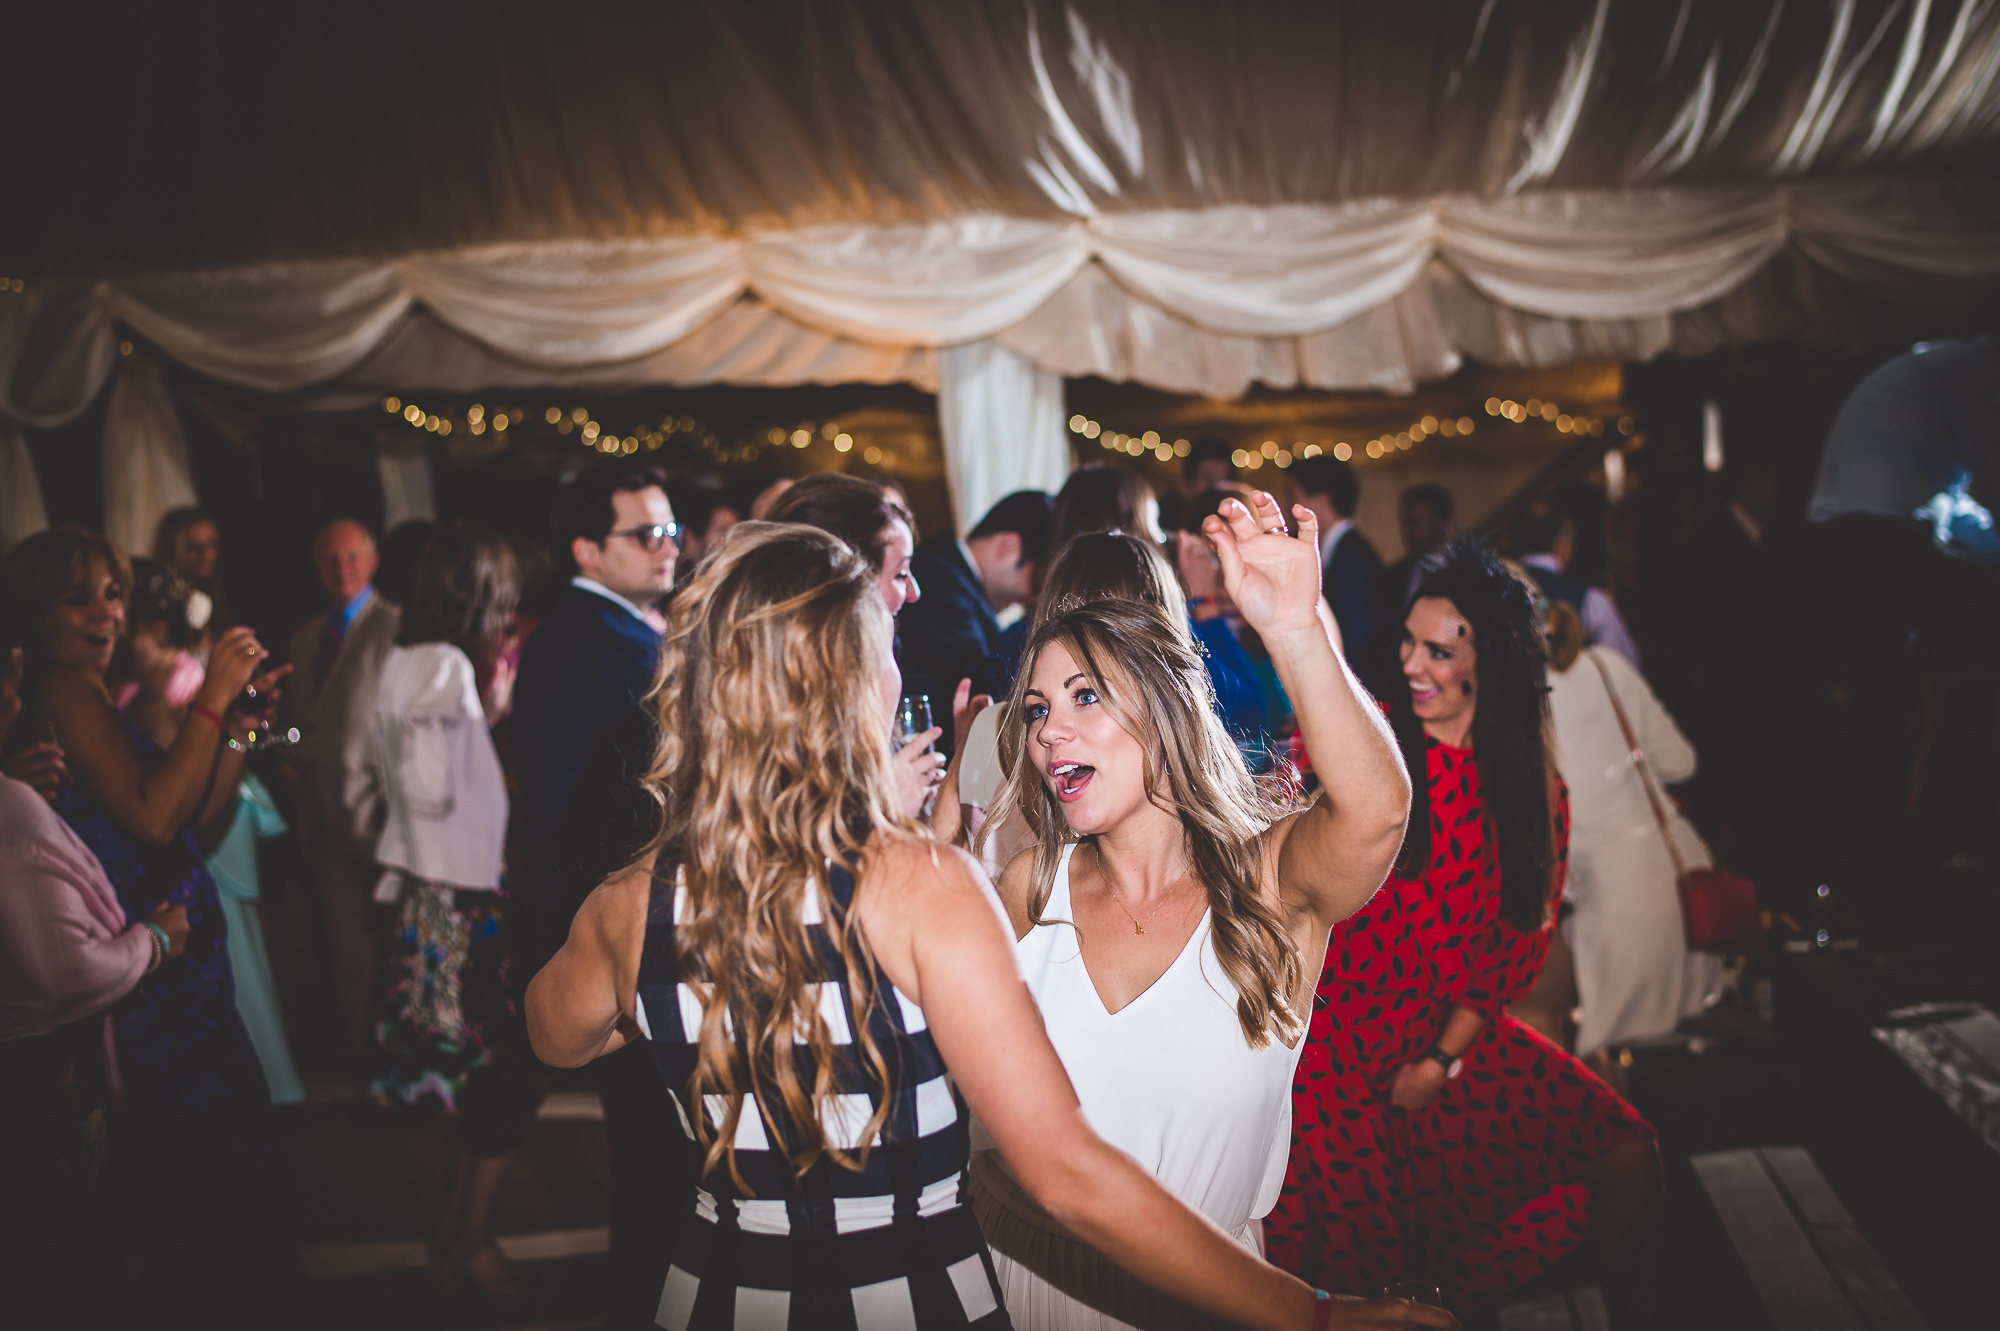 Two women dancing captured by a wedding photographer.